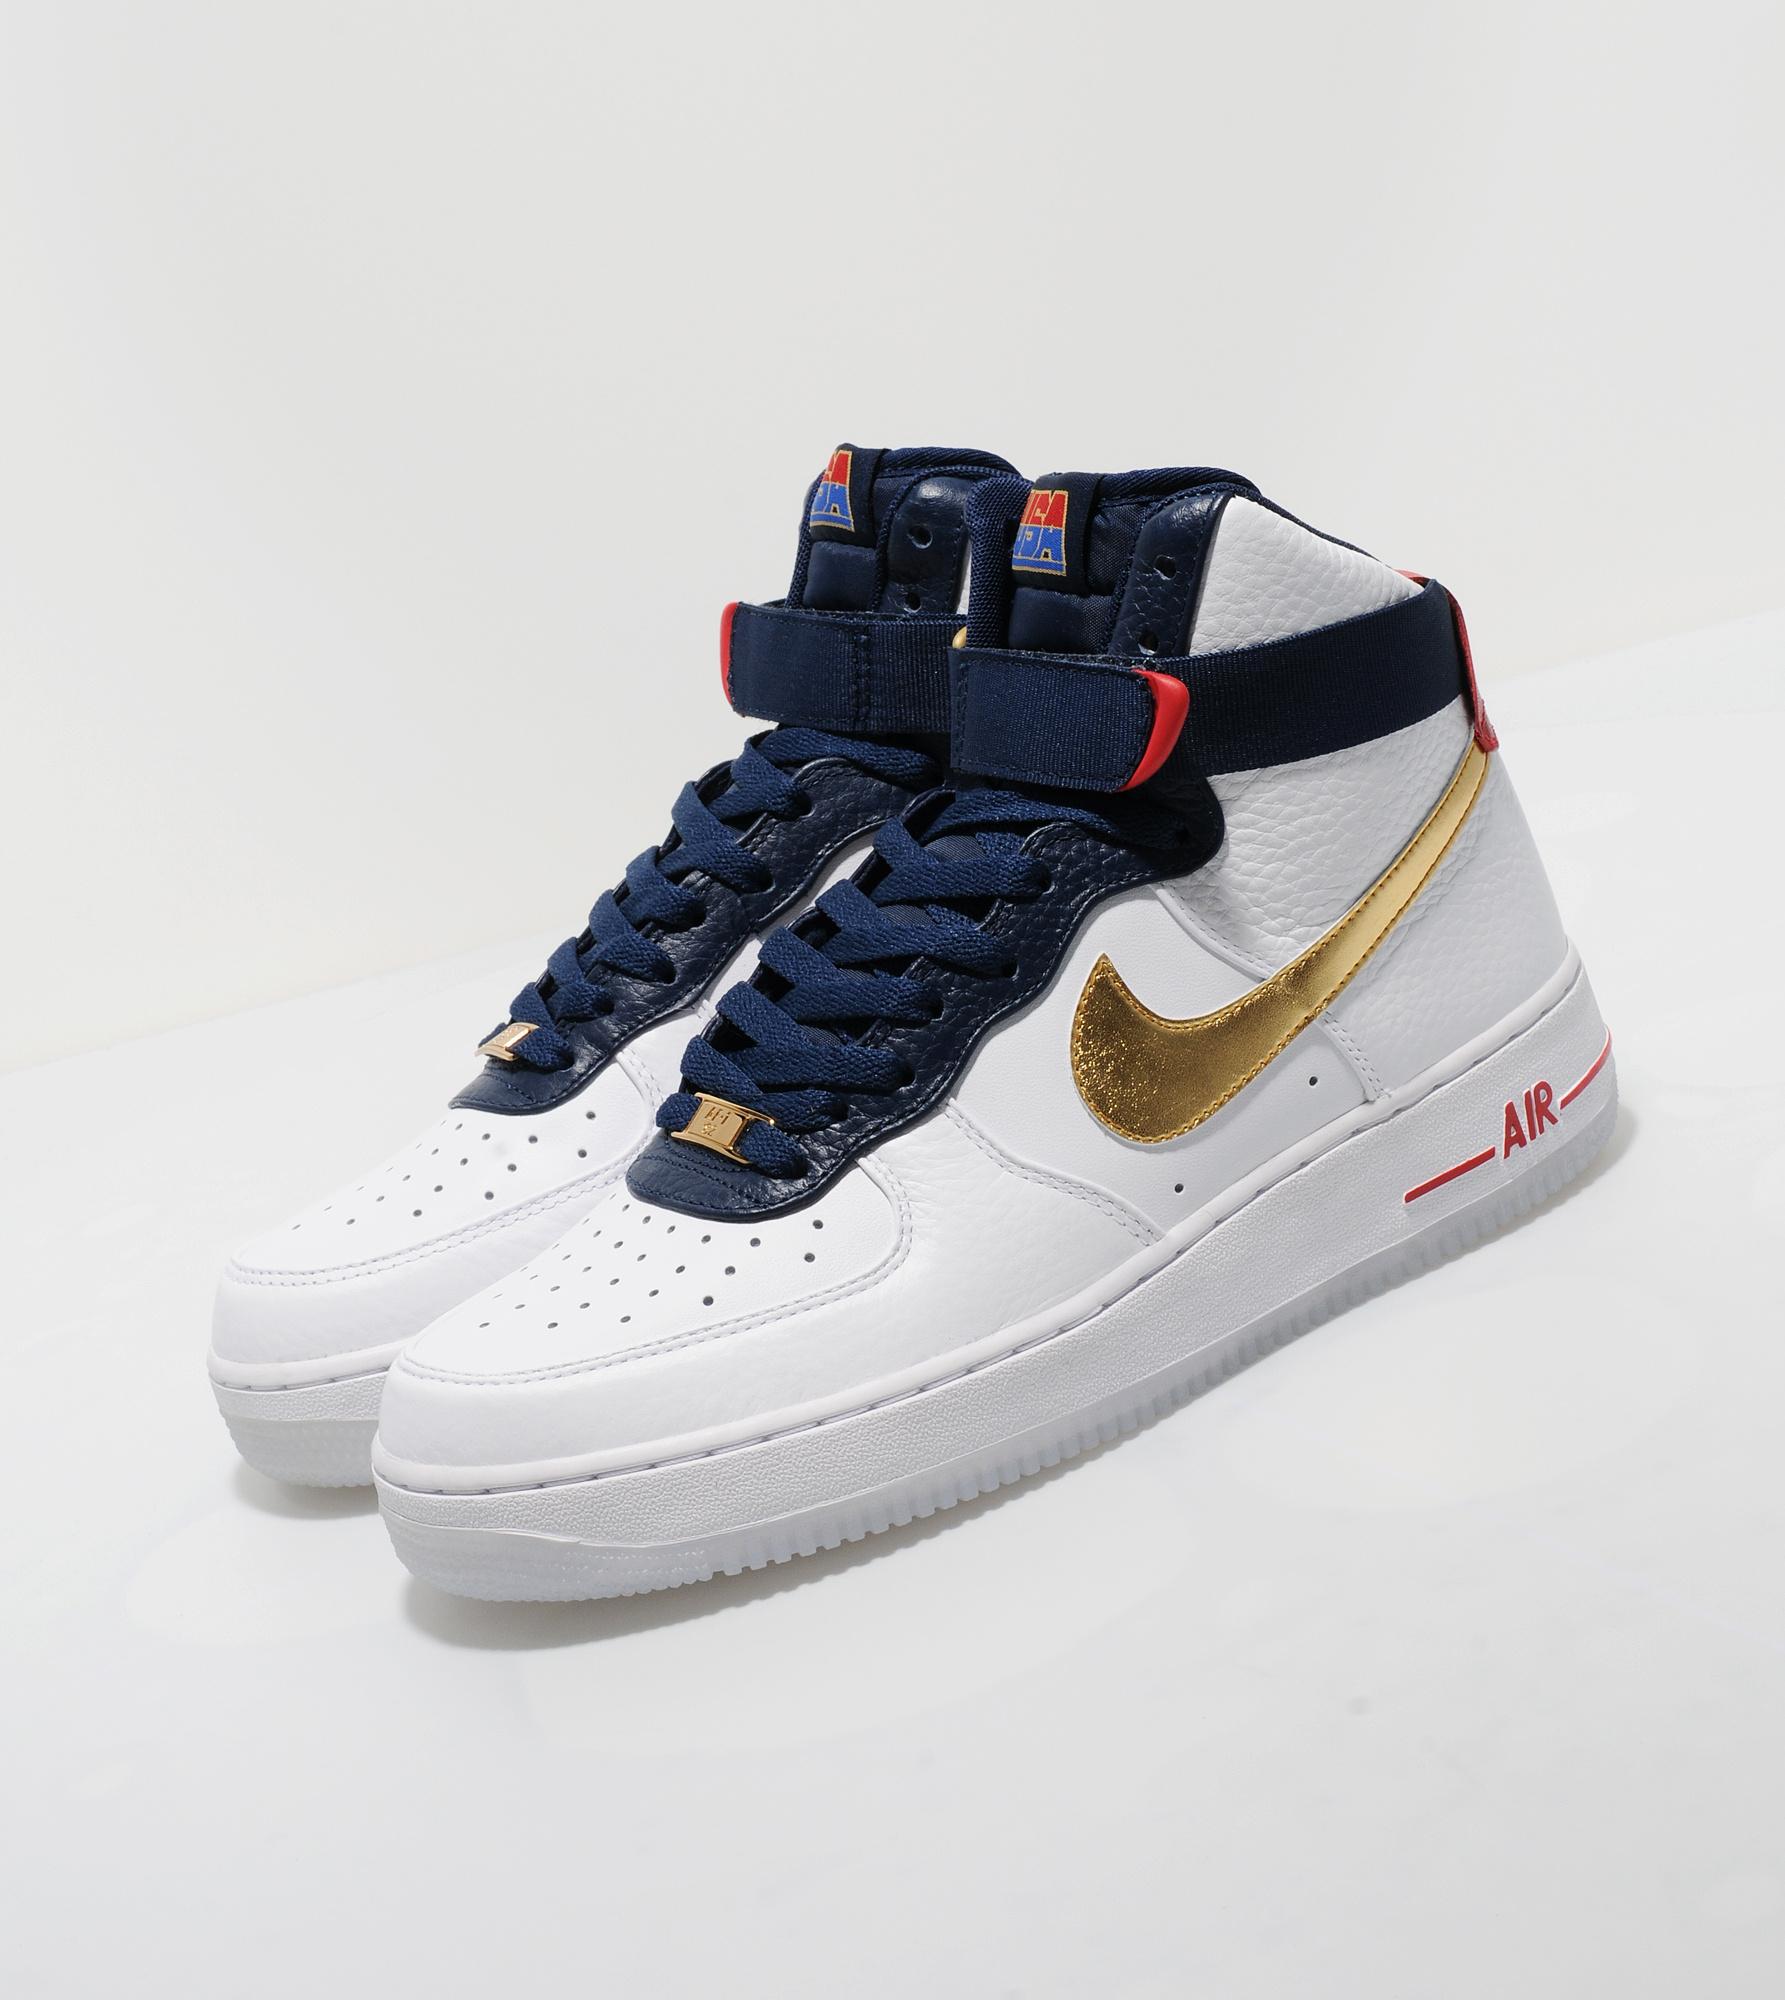 nike air force 1 dream team collection